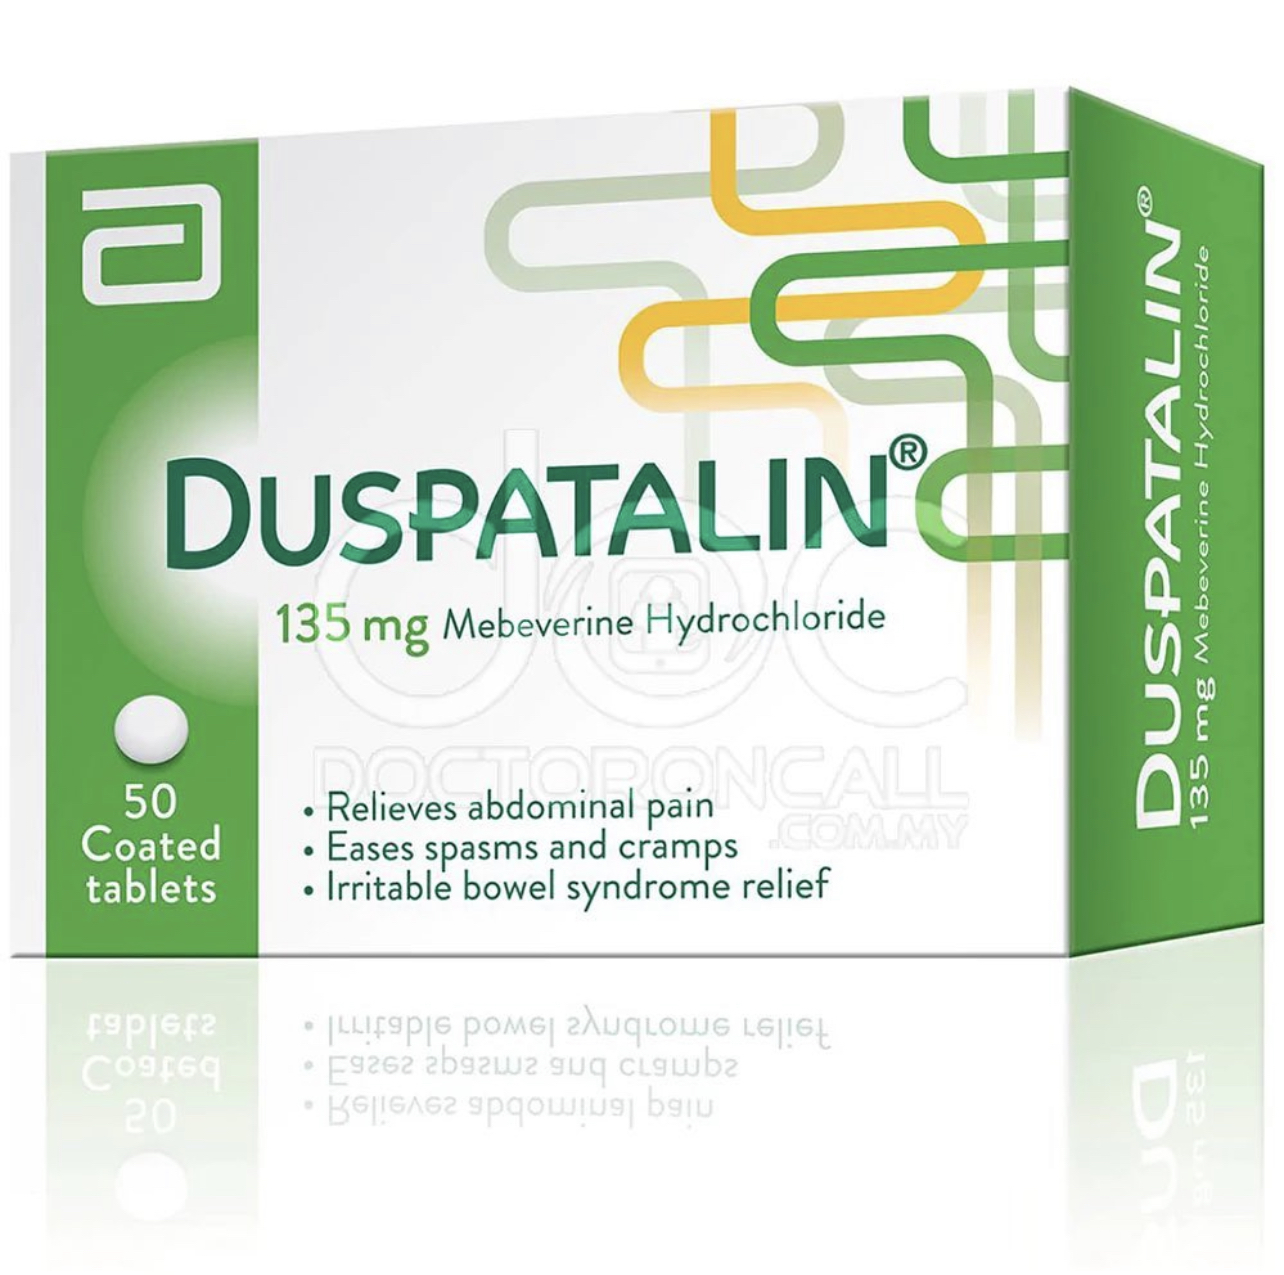 Primary image for Duspattallin 40tab used to alleviate some of the symptoms of IBS